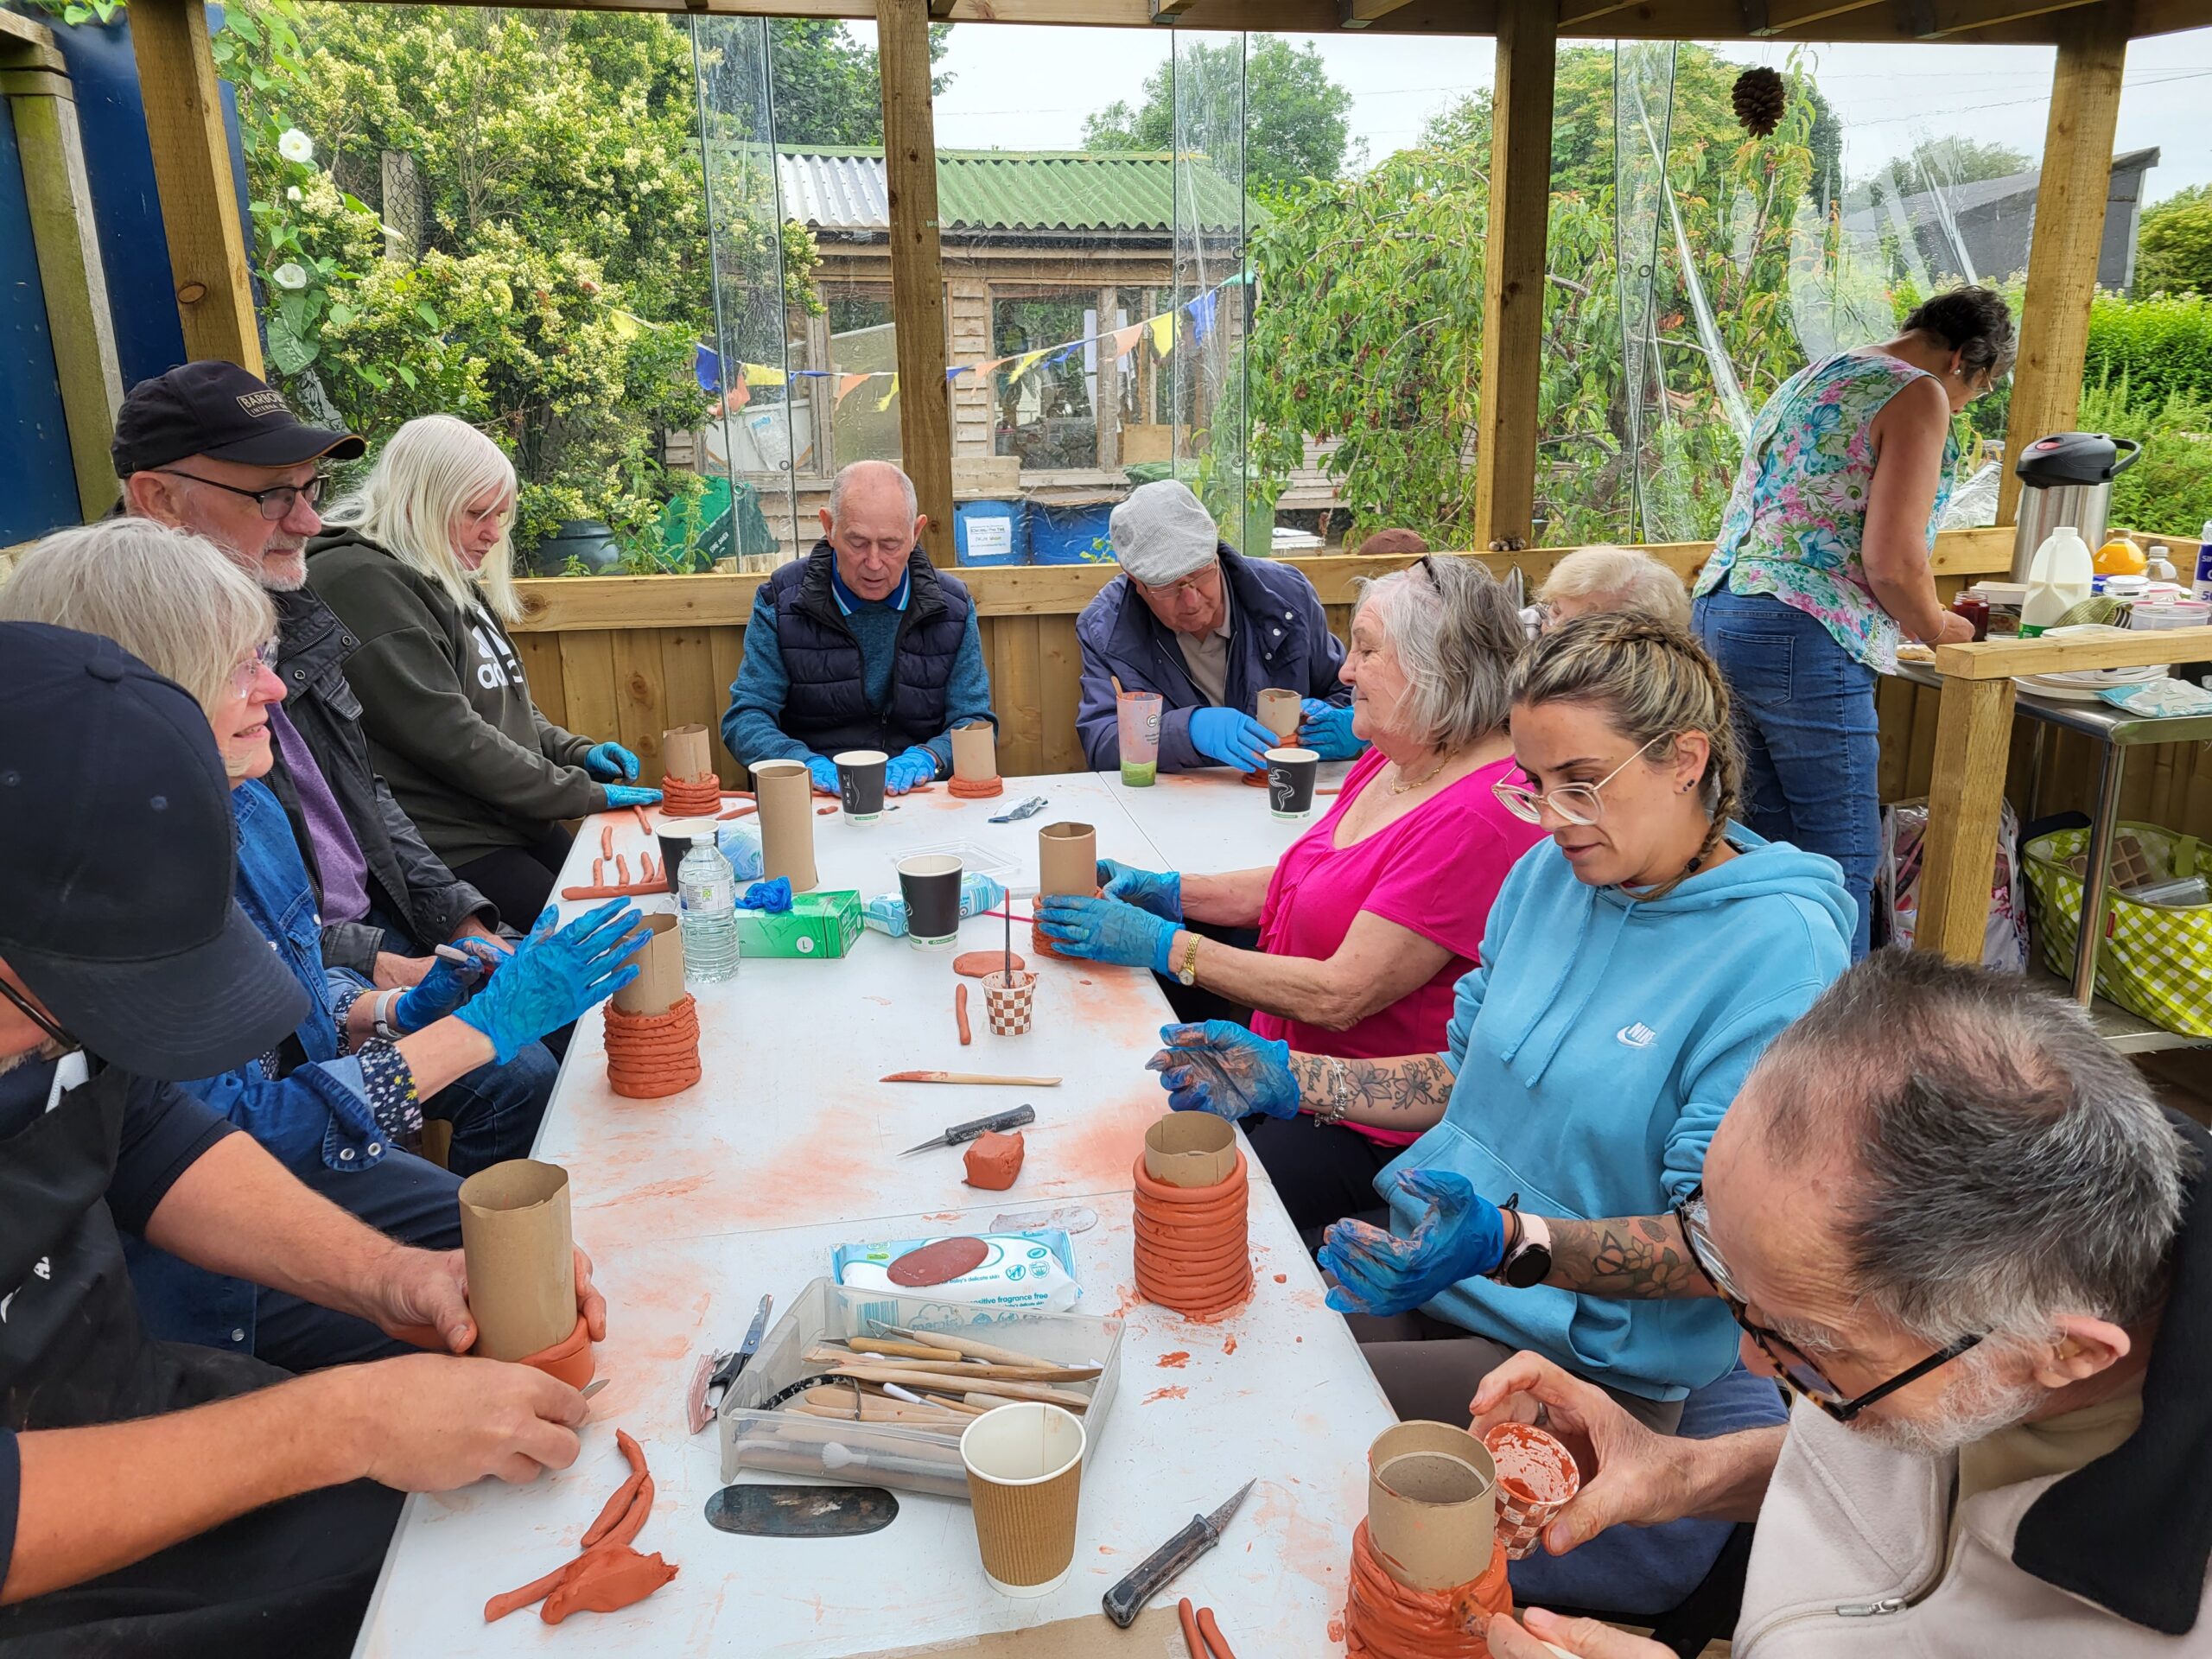 large group of people sitting around a table in a community allotment shelter, making clay models